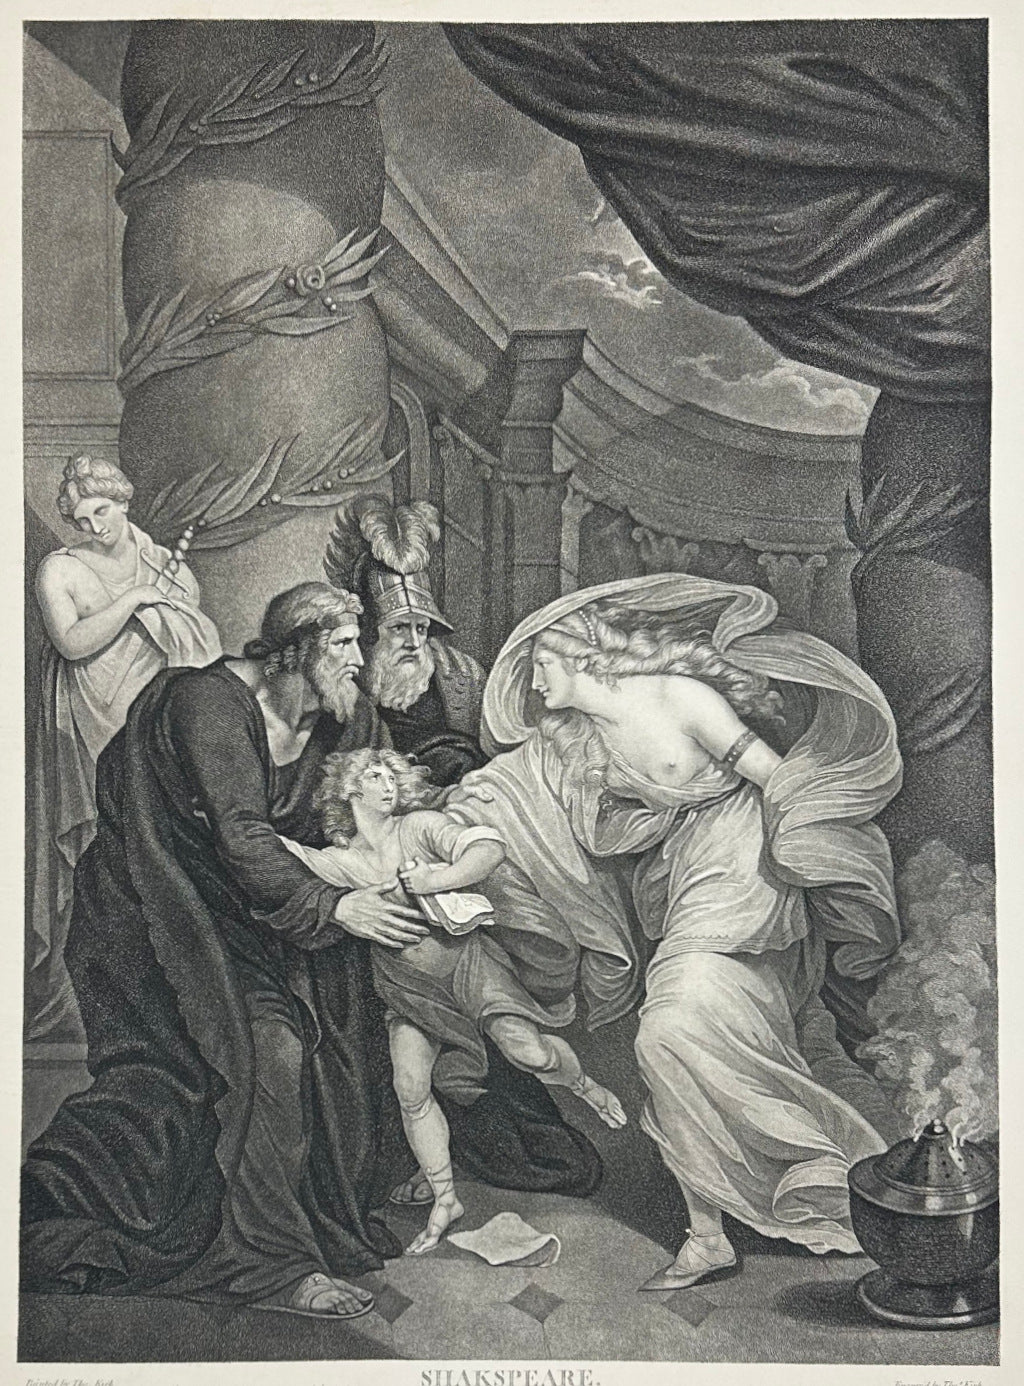 Kirk, Thomas Plate 87. “Titus Andronicus, Act IV, Scene i. Titus’ House. Titus, Marcus, Young Lucius pursued by Lavinia